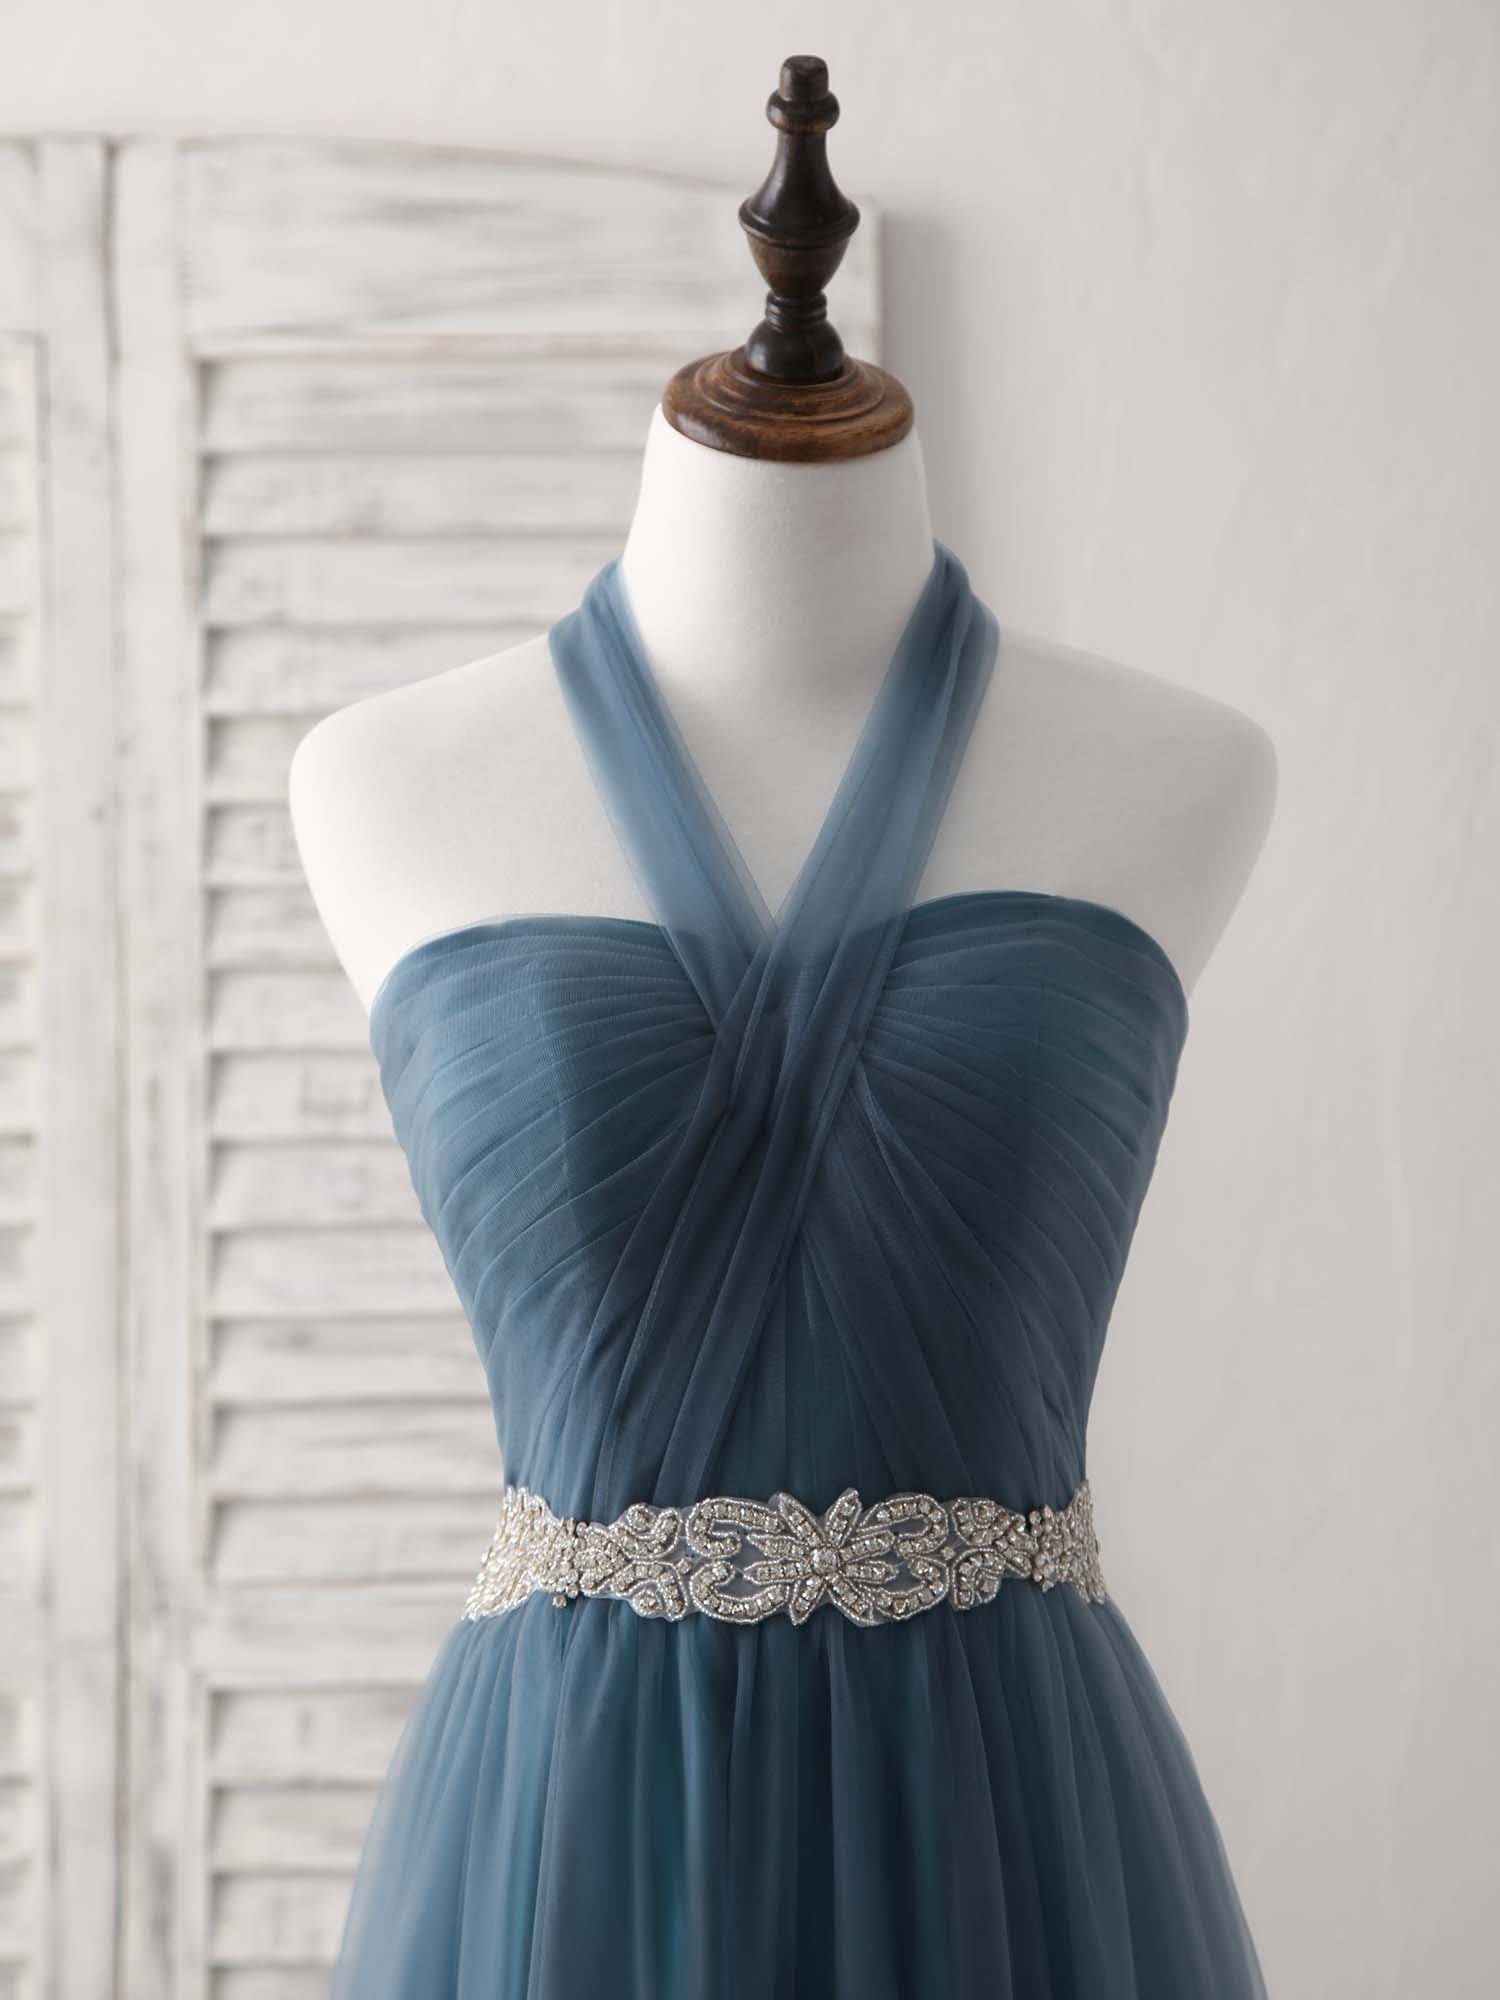 Evening Dress Italy, A-Line Gray Blue Tulle Long Bridesmaid Dress Gray Blue Prom Dress